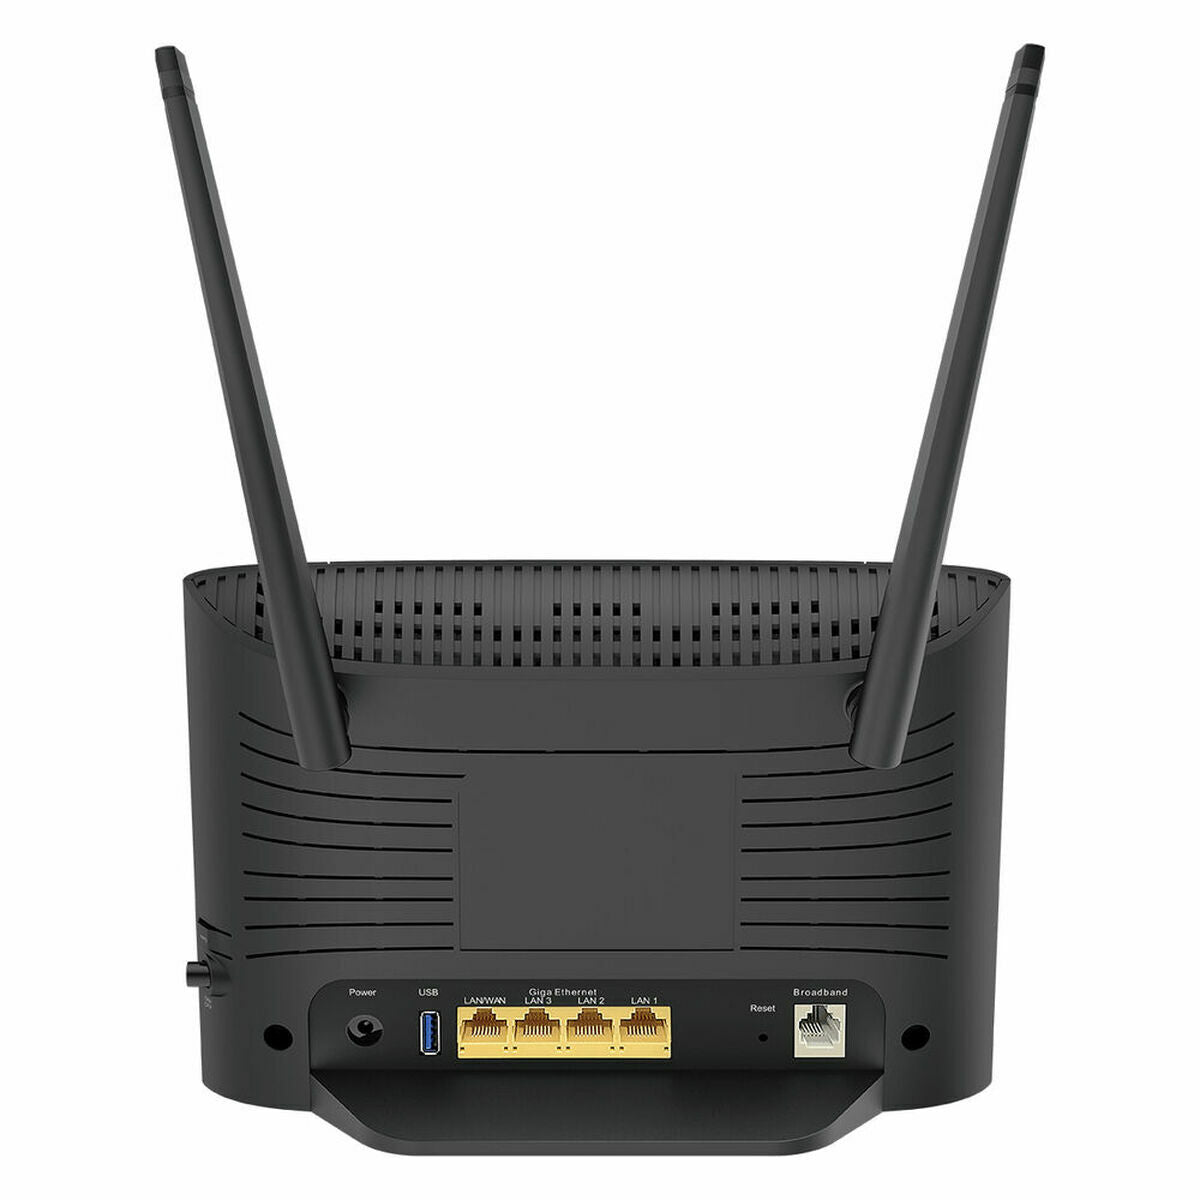 Router D-Link DSL-3788 866 Mbit/s Wi-Fi 5, D-Link, Computing, Network devices, router-d-link-dsl-3788-866-mbit-s-wi-fi-5, Brand_D-Link, category-reference-2609, category-reference-2803, category-reference-2826, category-reference-t-19685, category-reference-t-19914, category-reference-t-21371, Condition_NEW, networks/wiring, Price_100 - 200, Teleworking, RiotNook